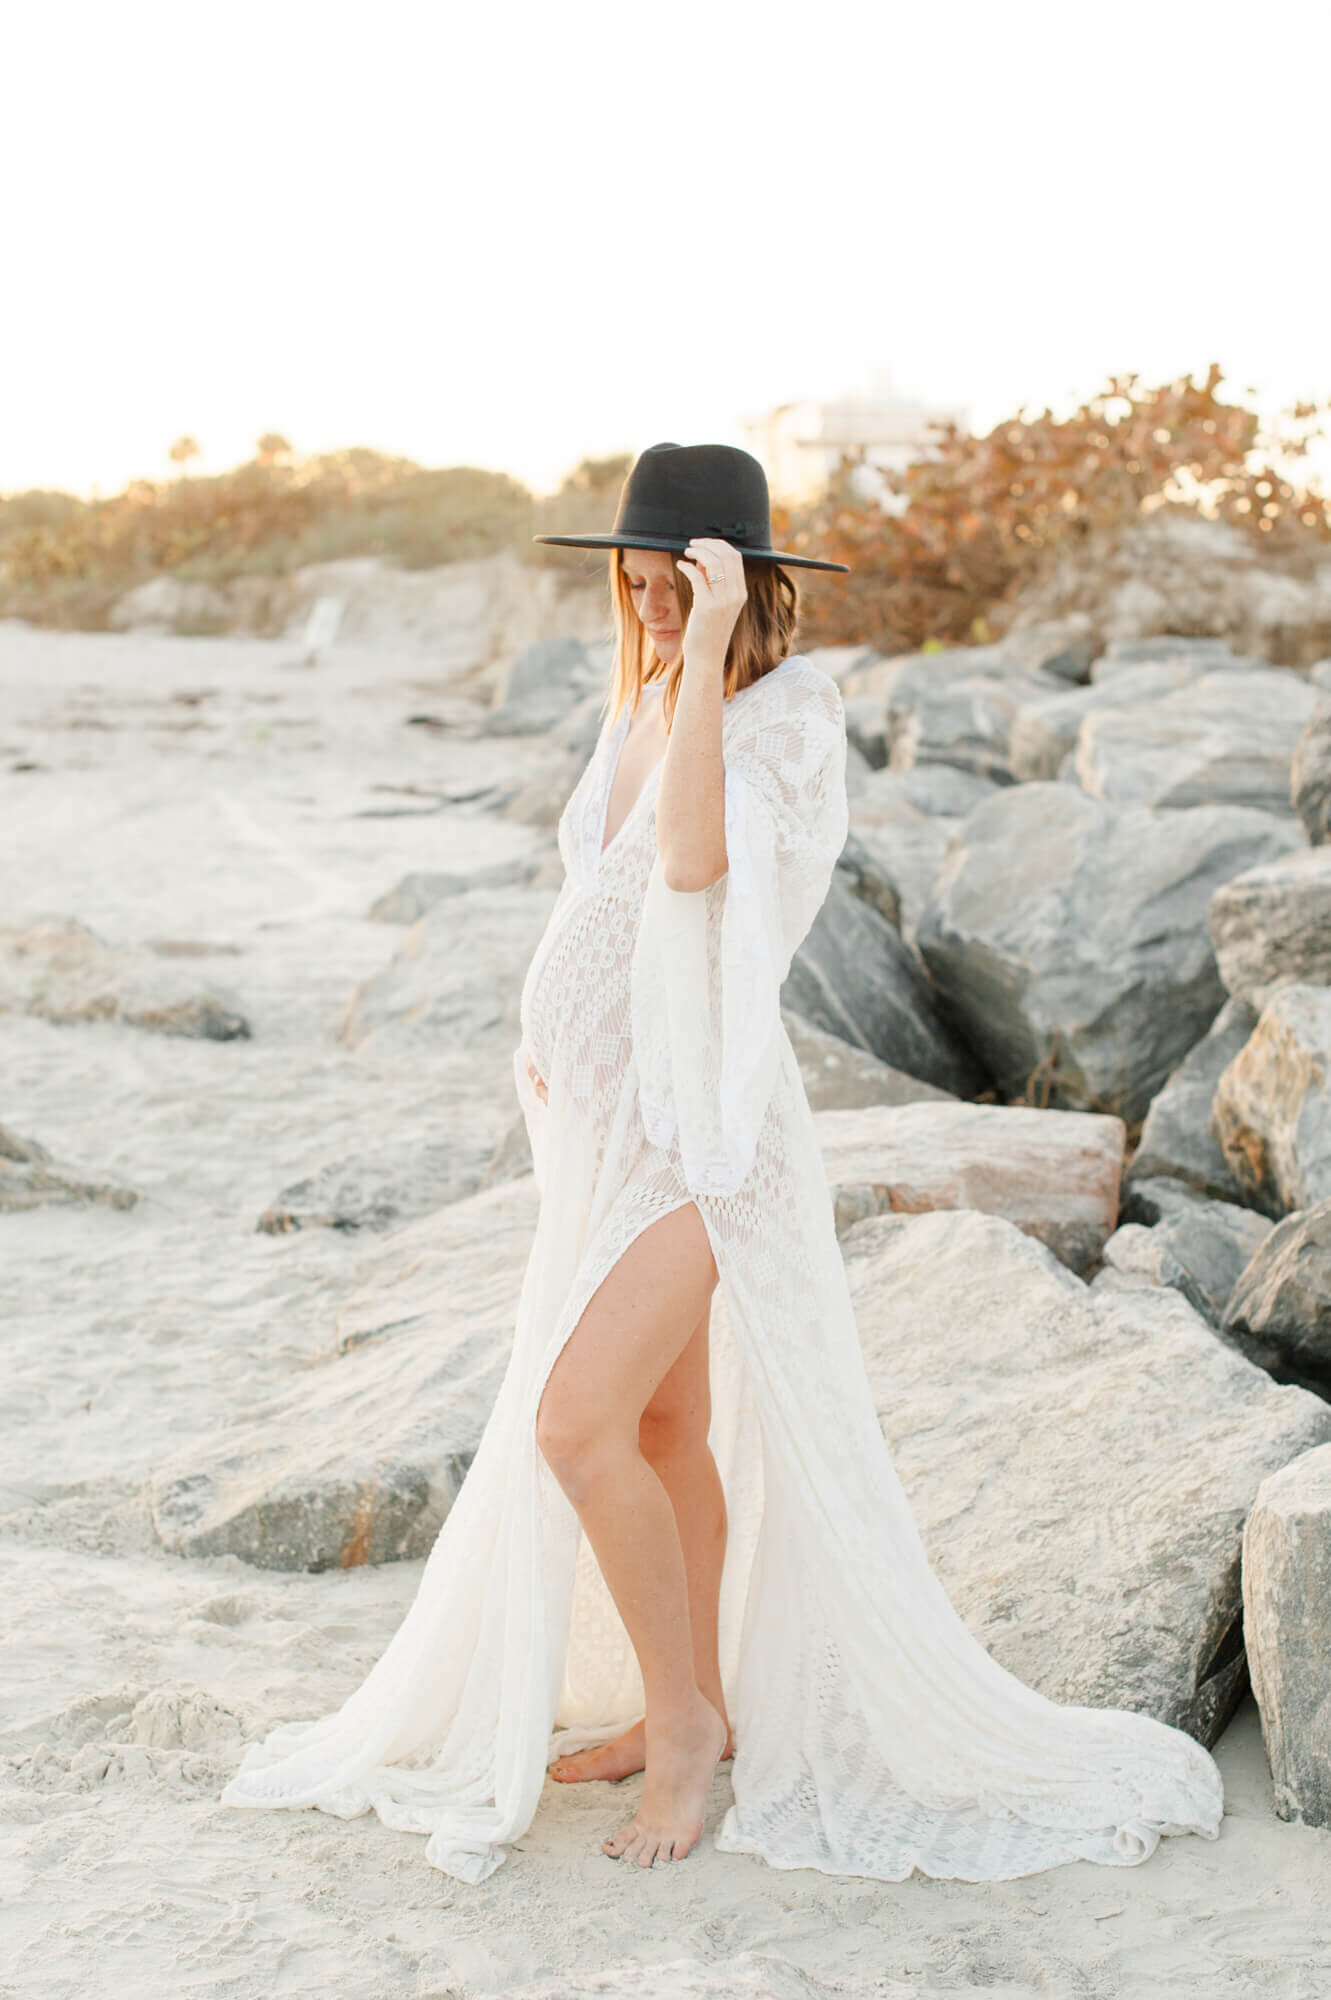 Pregnant mom standing on the beach near rocks holding her wide brim hat in a white lace gown